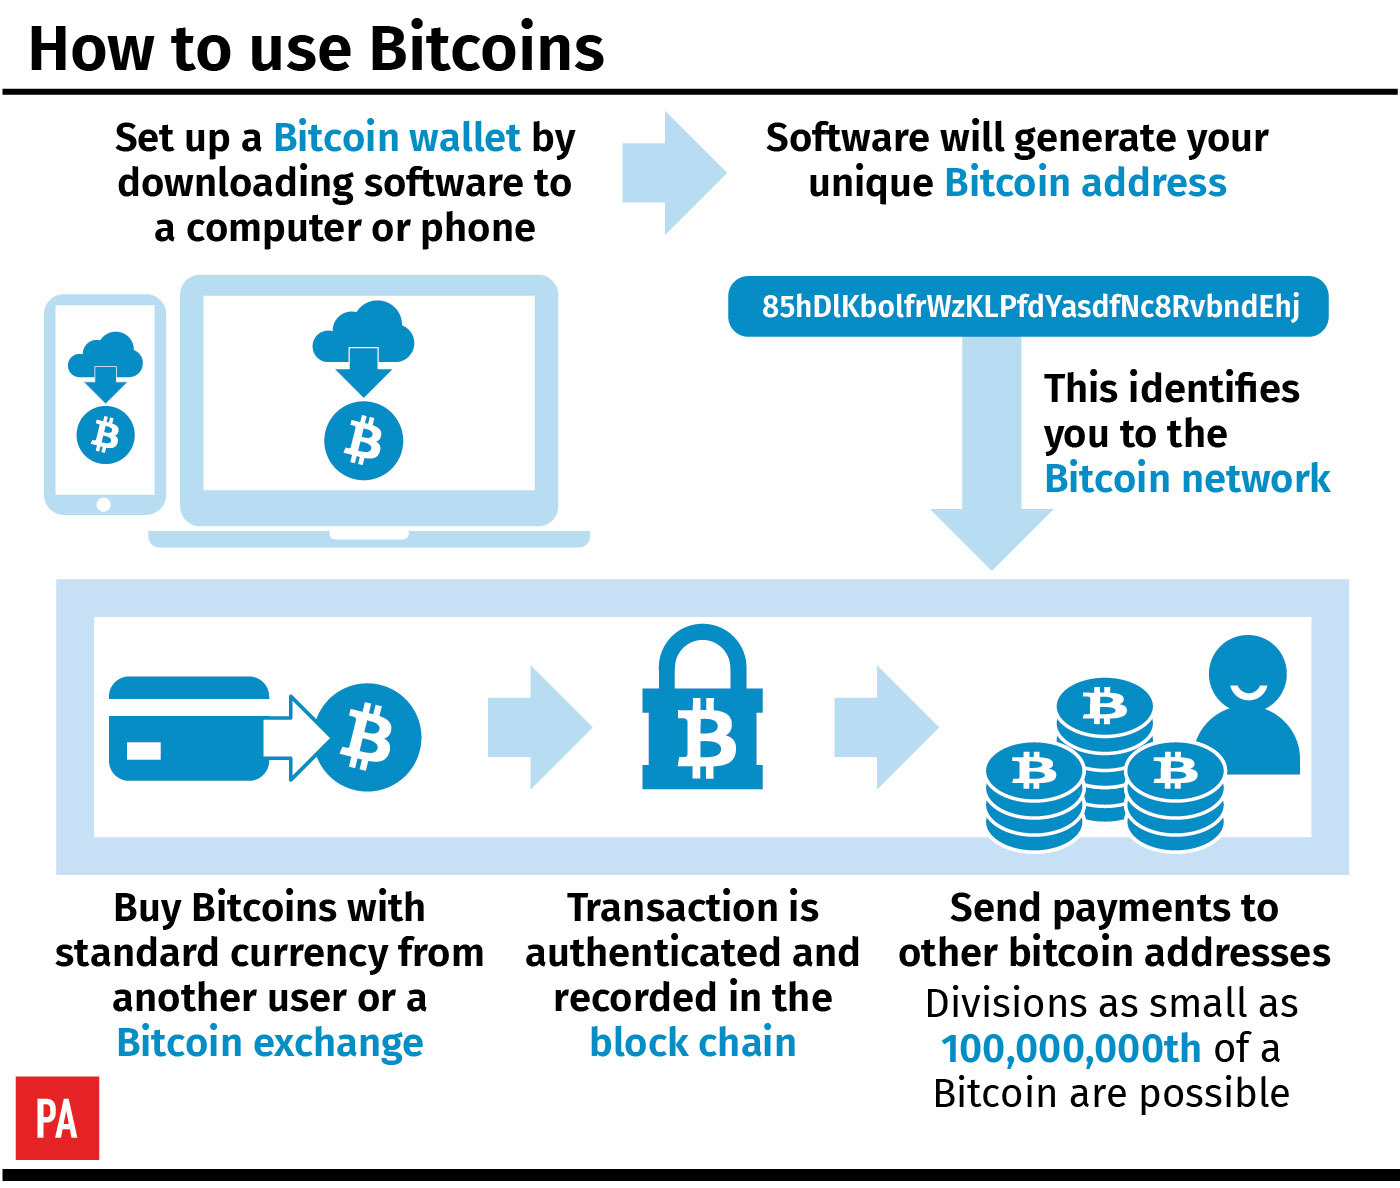 How to use Bitcoins. (PA)